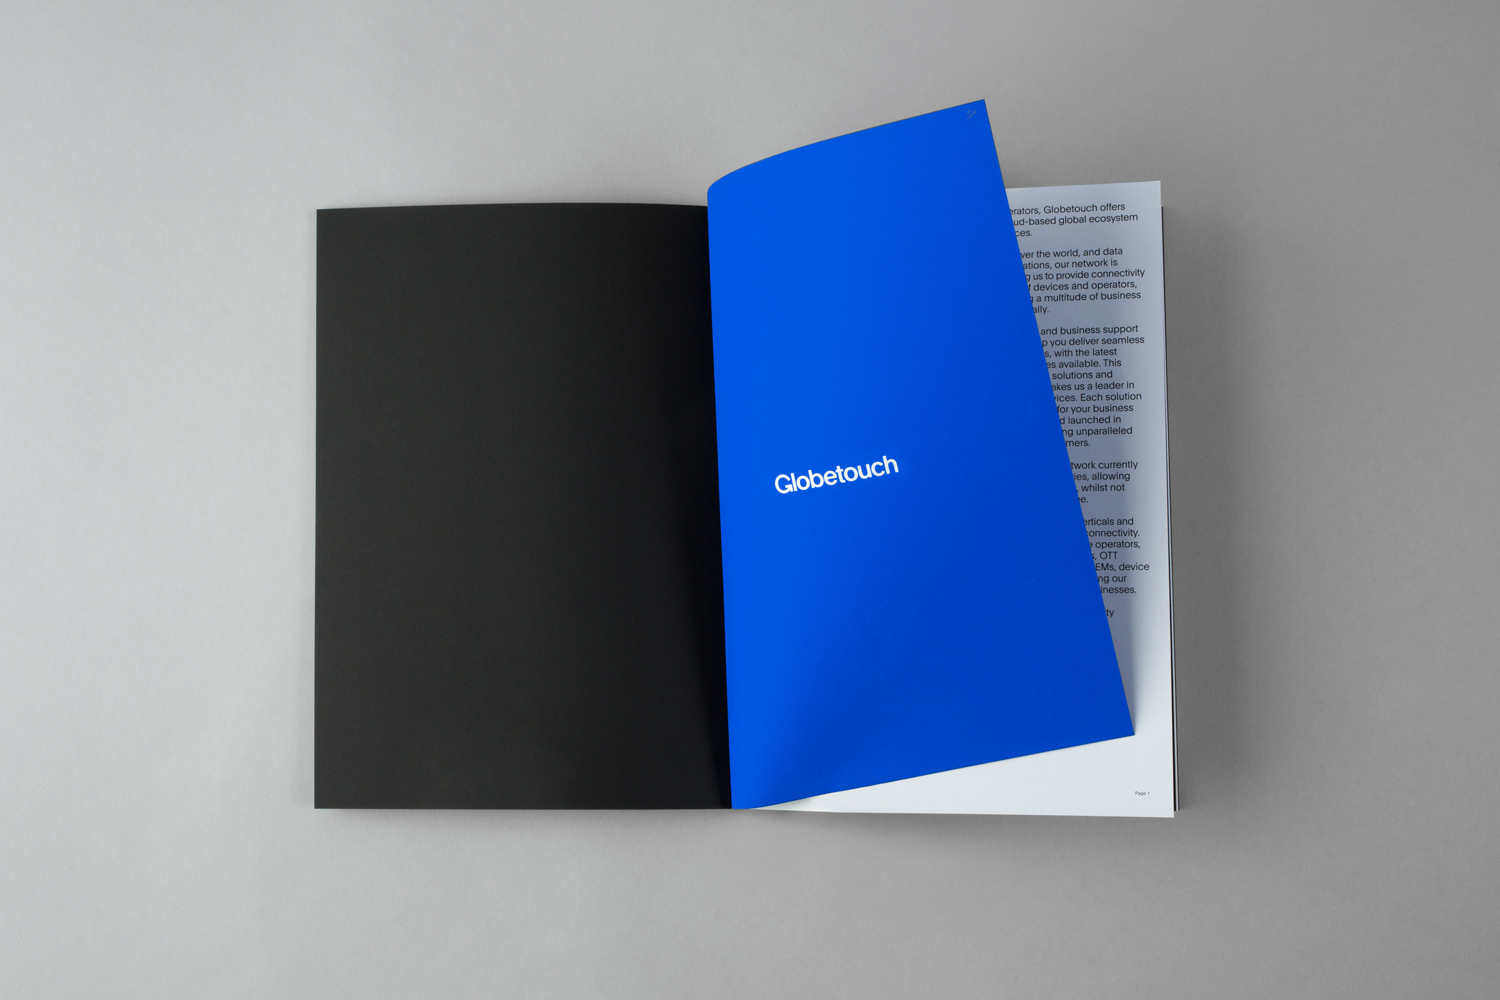 Brand identity and brochure for global mobile communications platform Globetouch by graphic designs studio Bunch